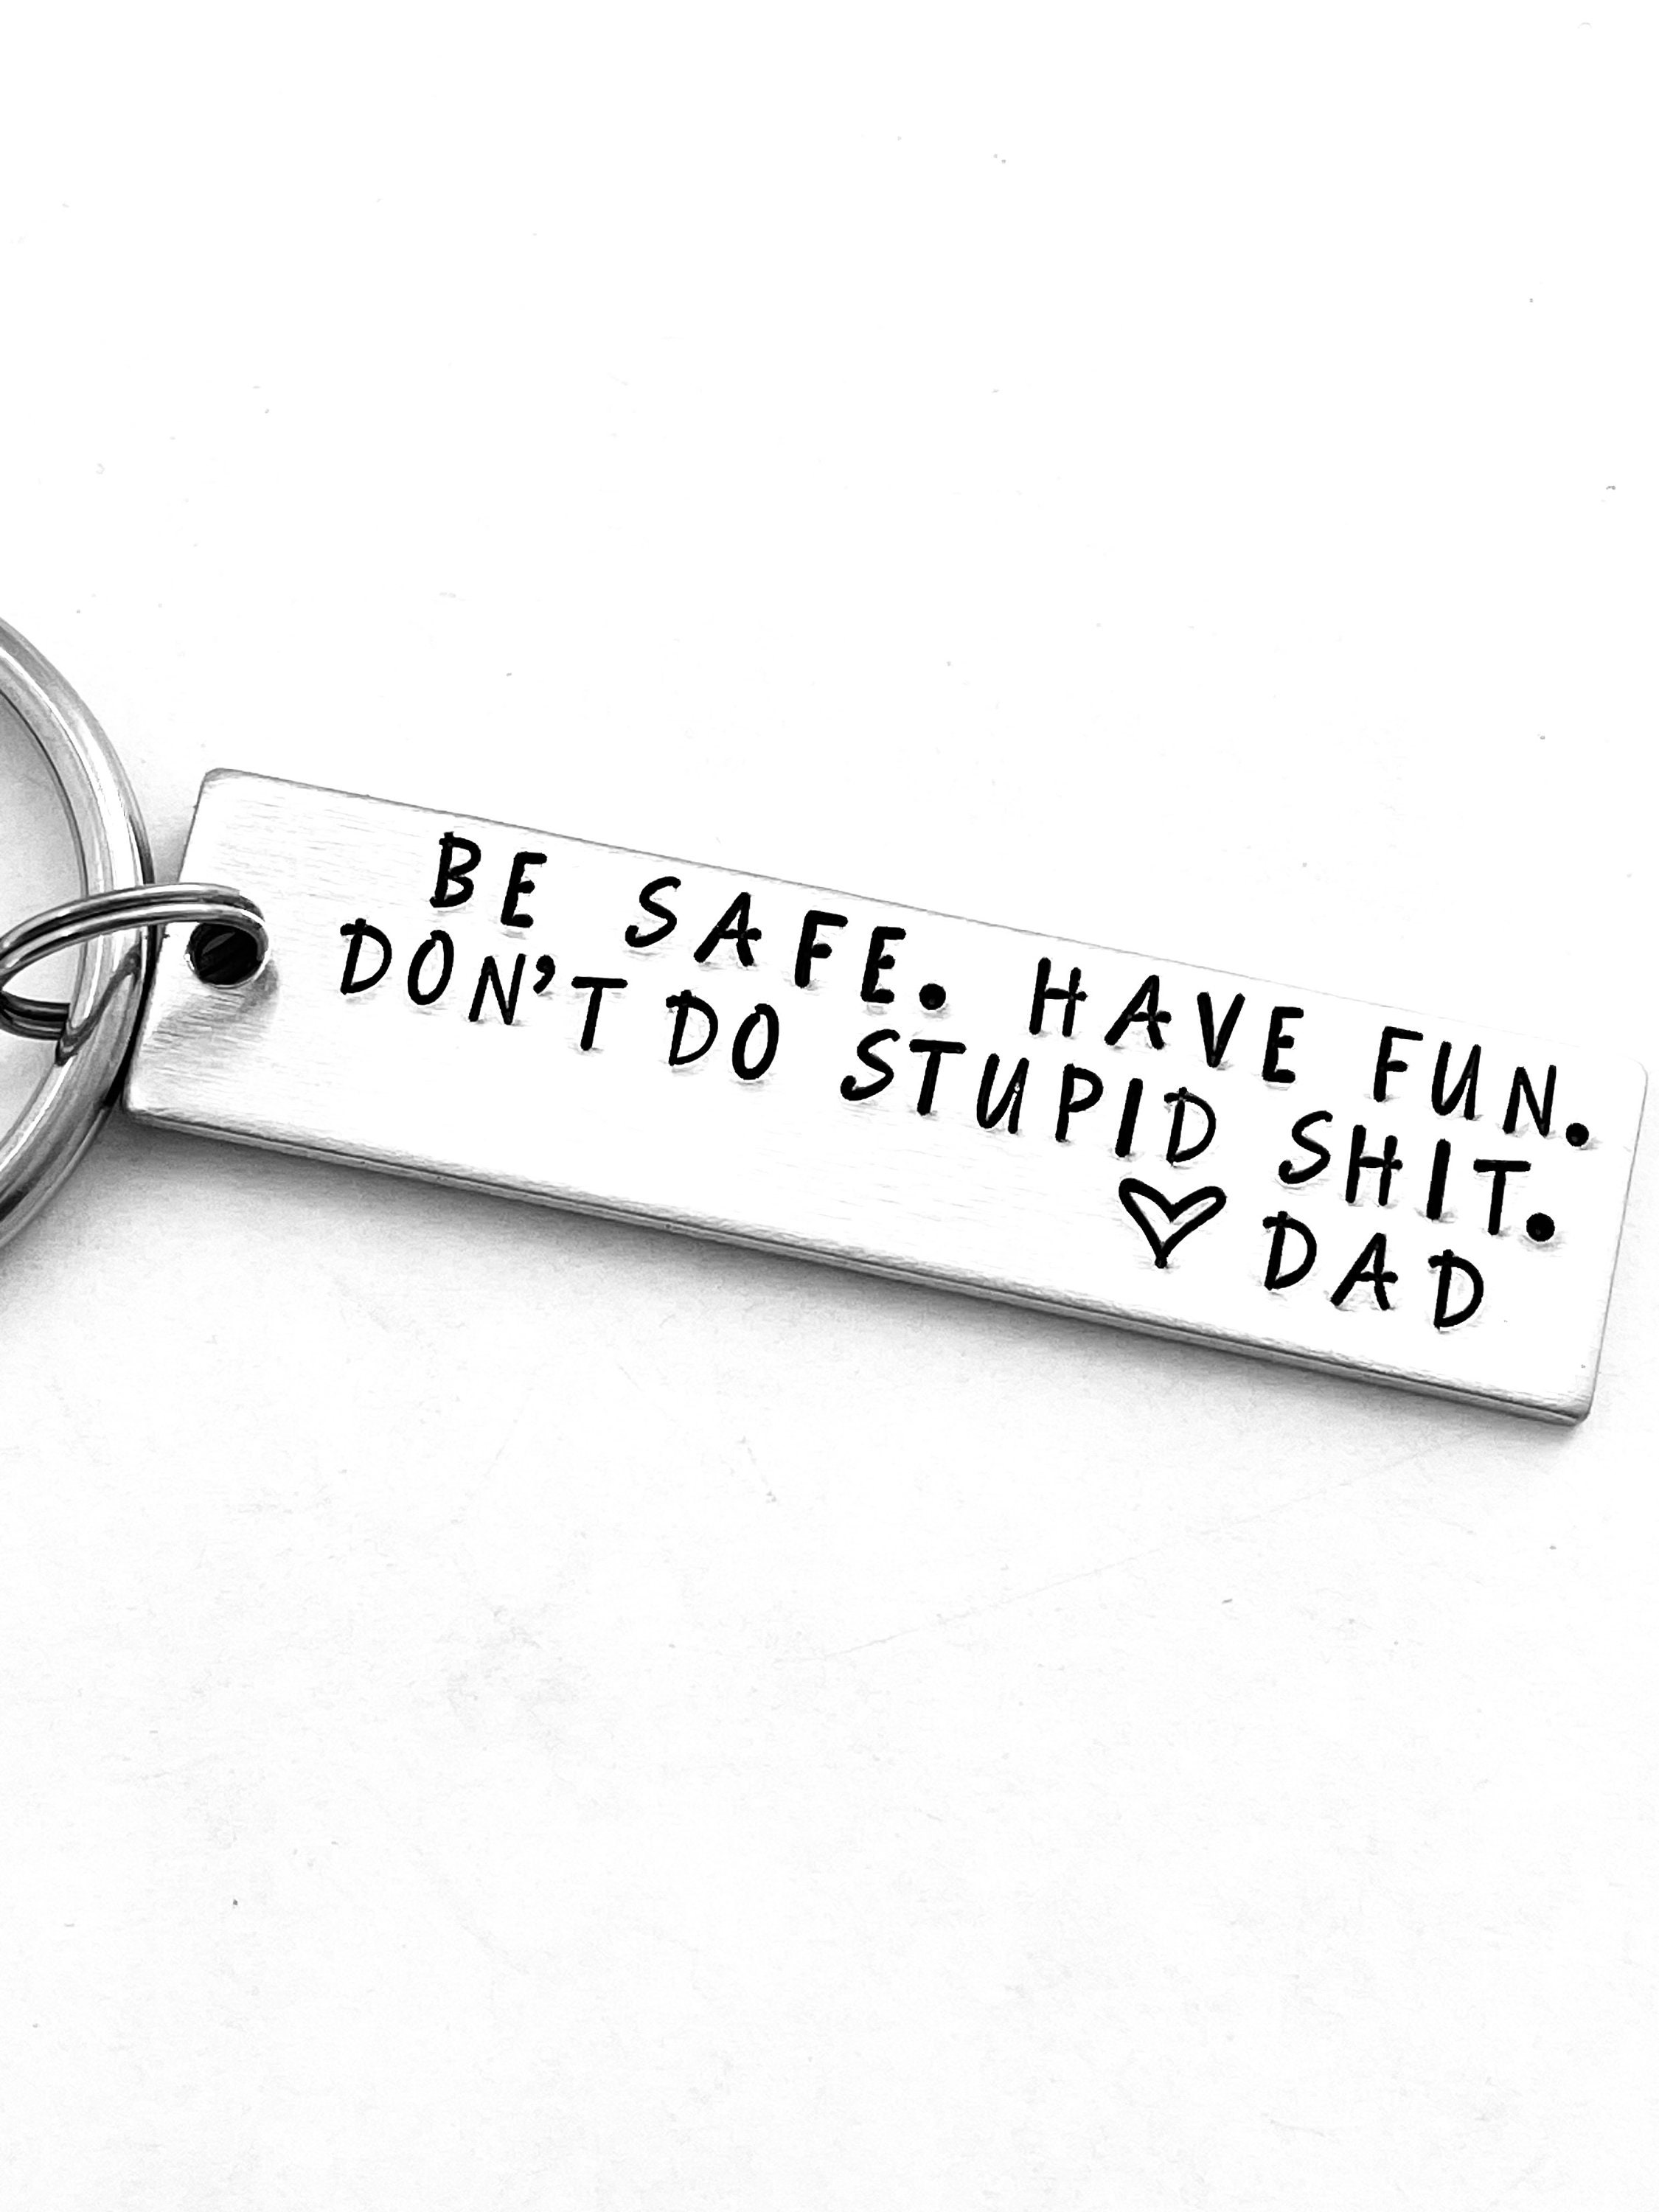 Be Safe. Have Fun & Don't Do Stupid Shit. Love Dad -  Norway